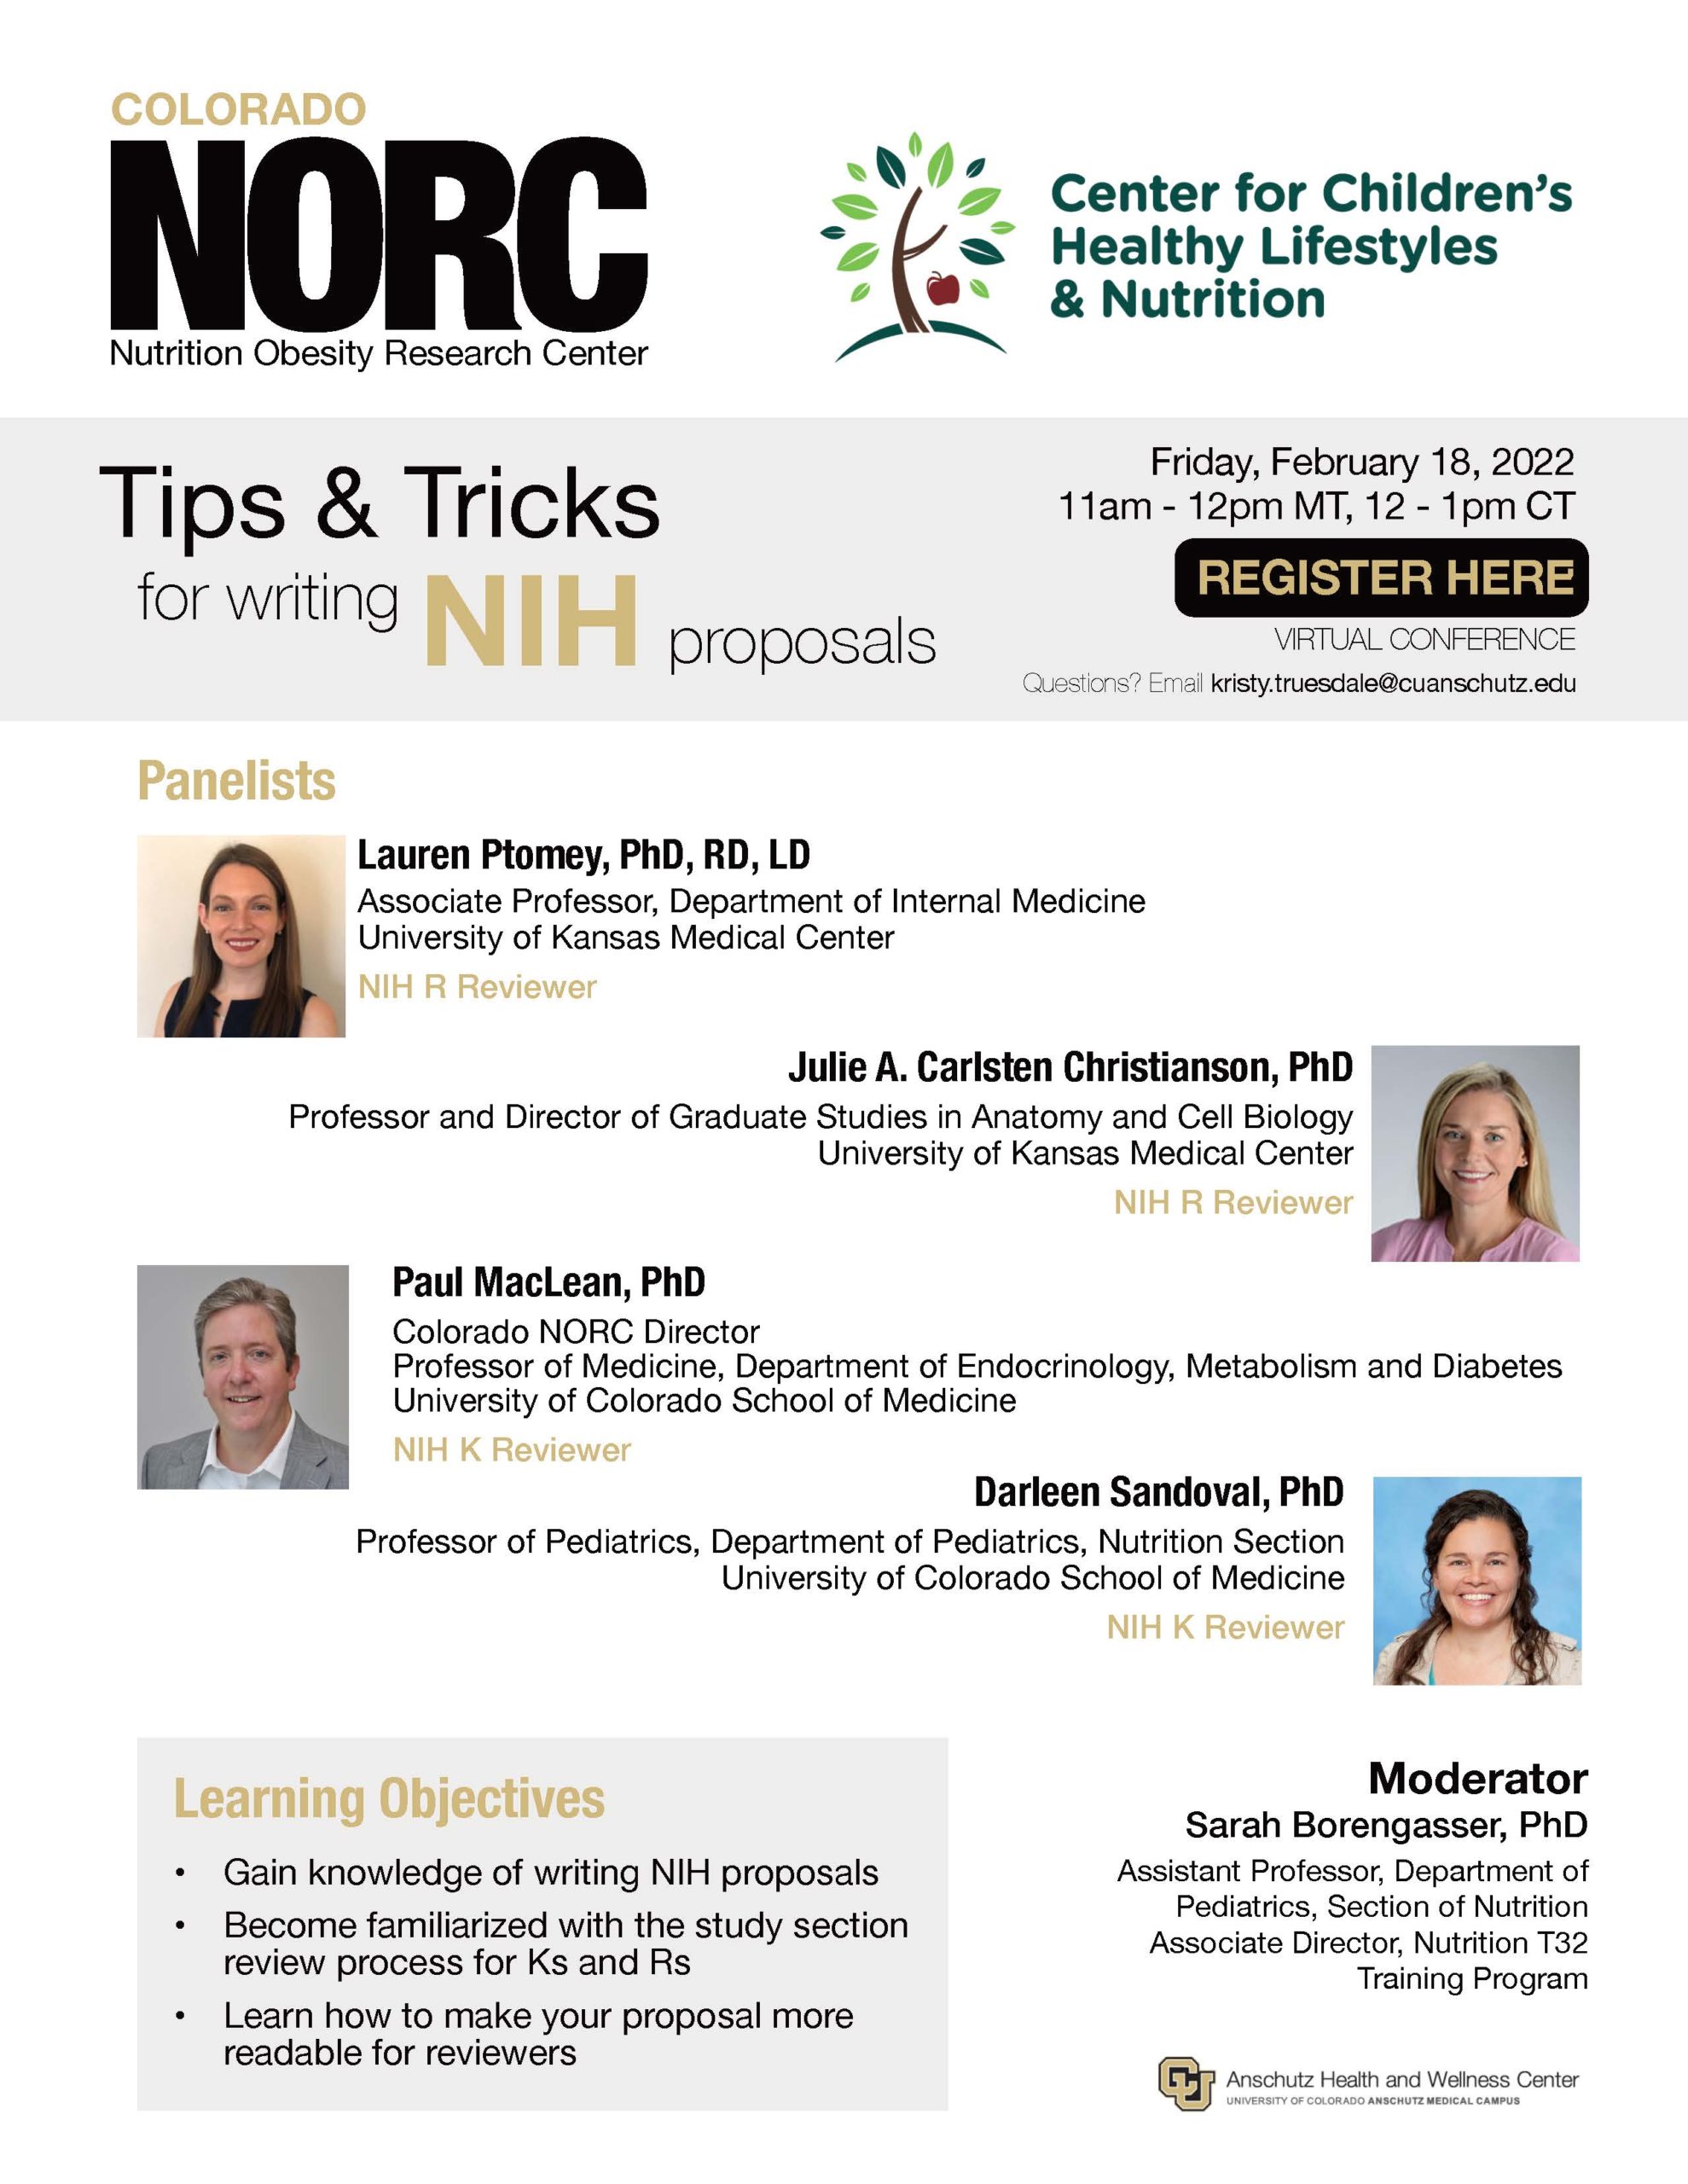 NORC Events